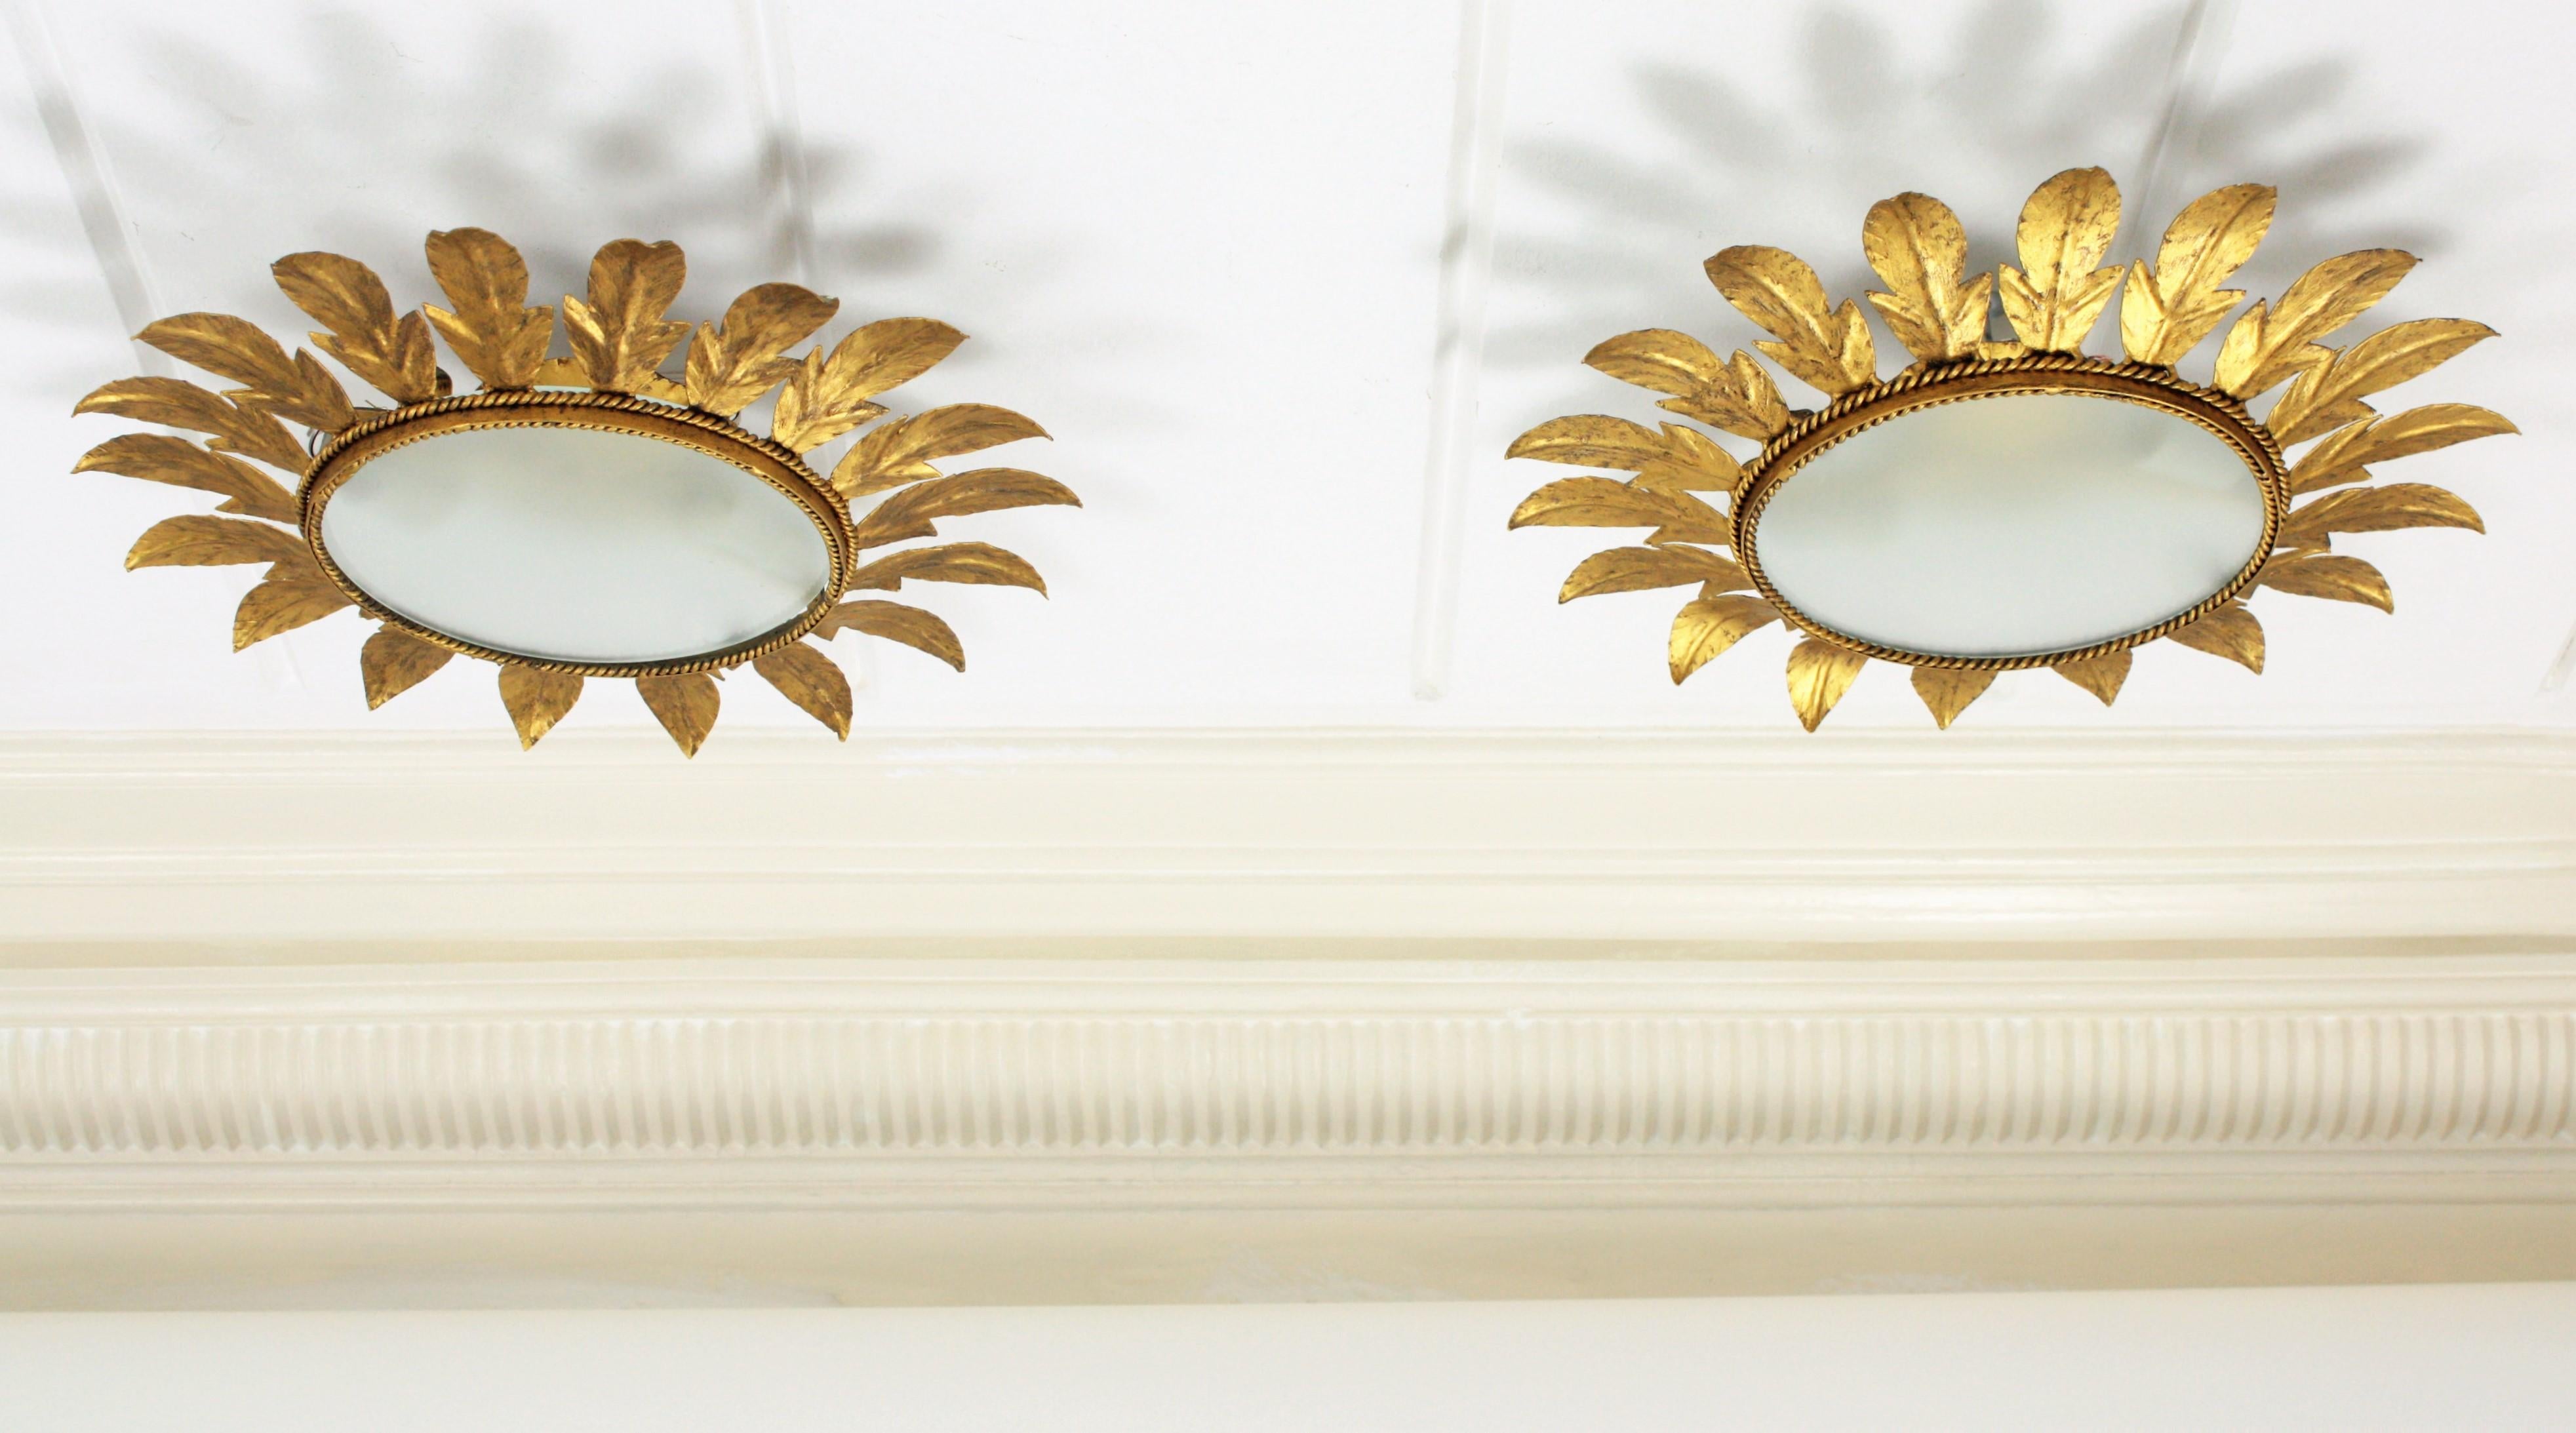 A lovely pair of hand-hammered gilt iron flower sunburst light fixtures with frosted glass difussors. Spain, 1960s.
They can be used as ceiling or wall lights and the frosted glass can be changed by a mirror glass to be used as mirrors.
Measures: 45